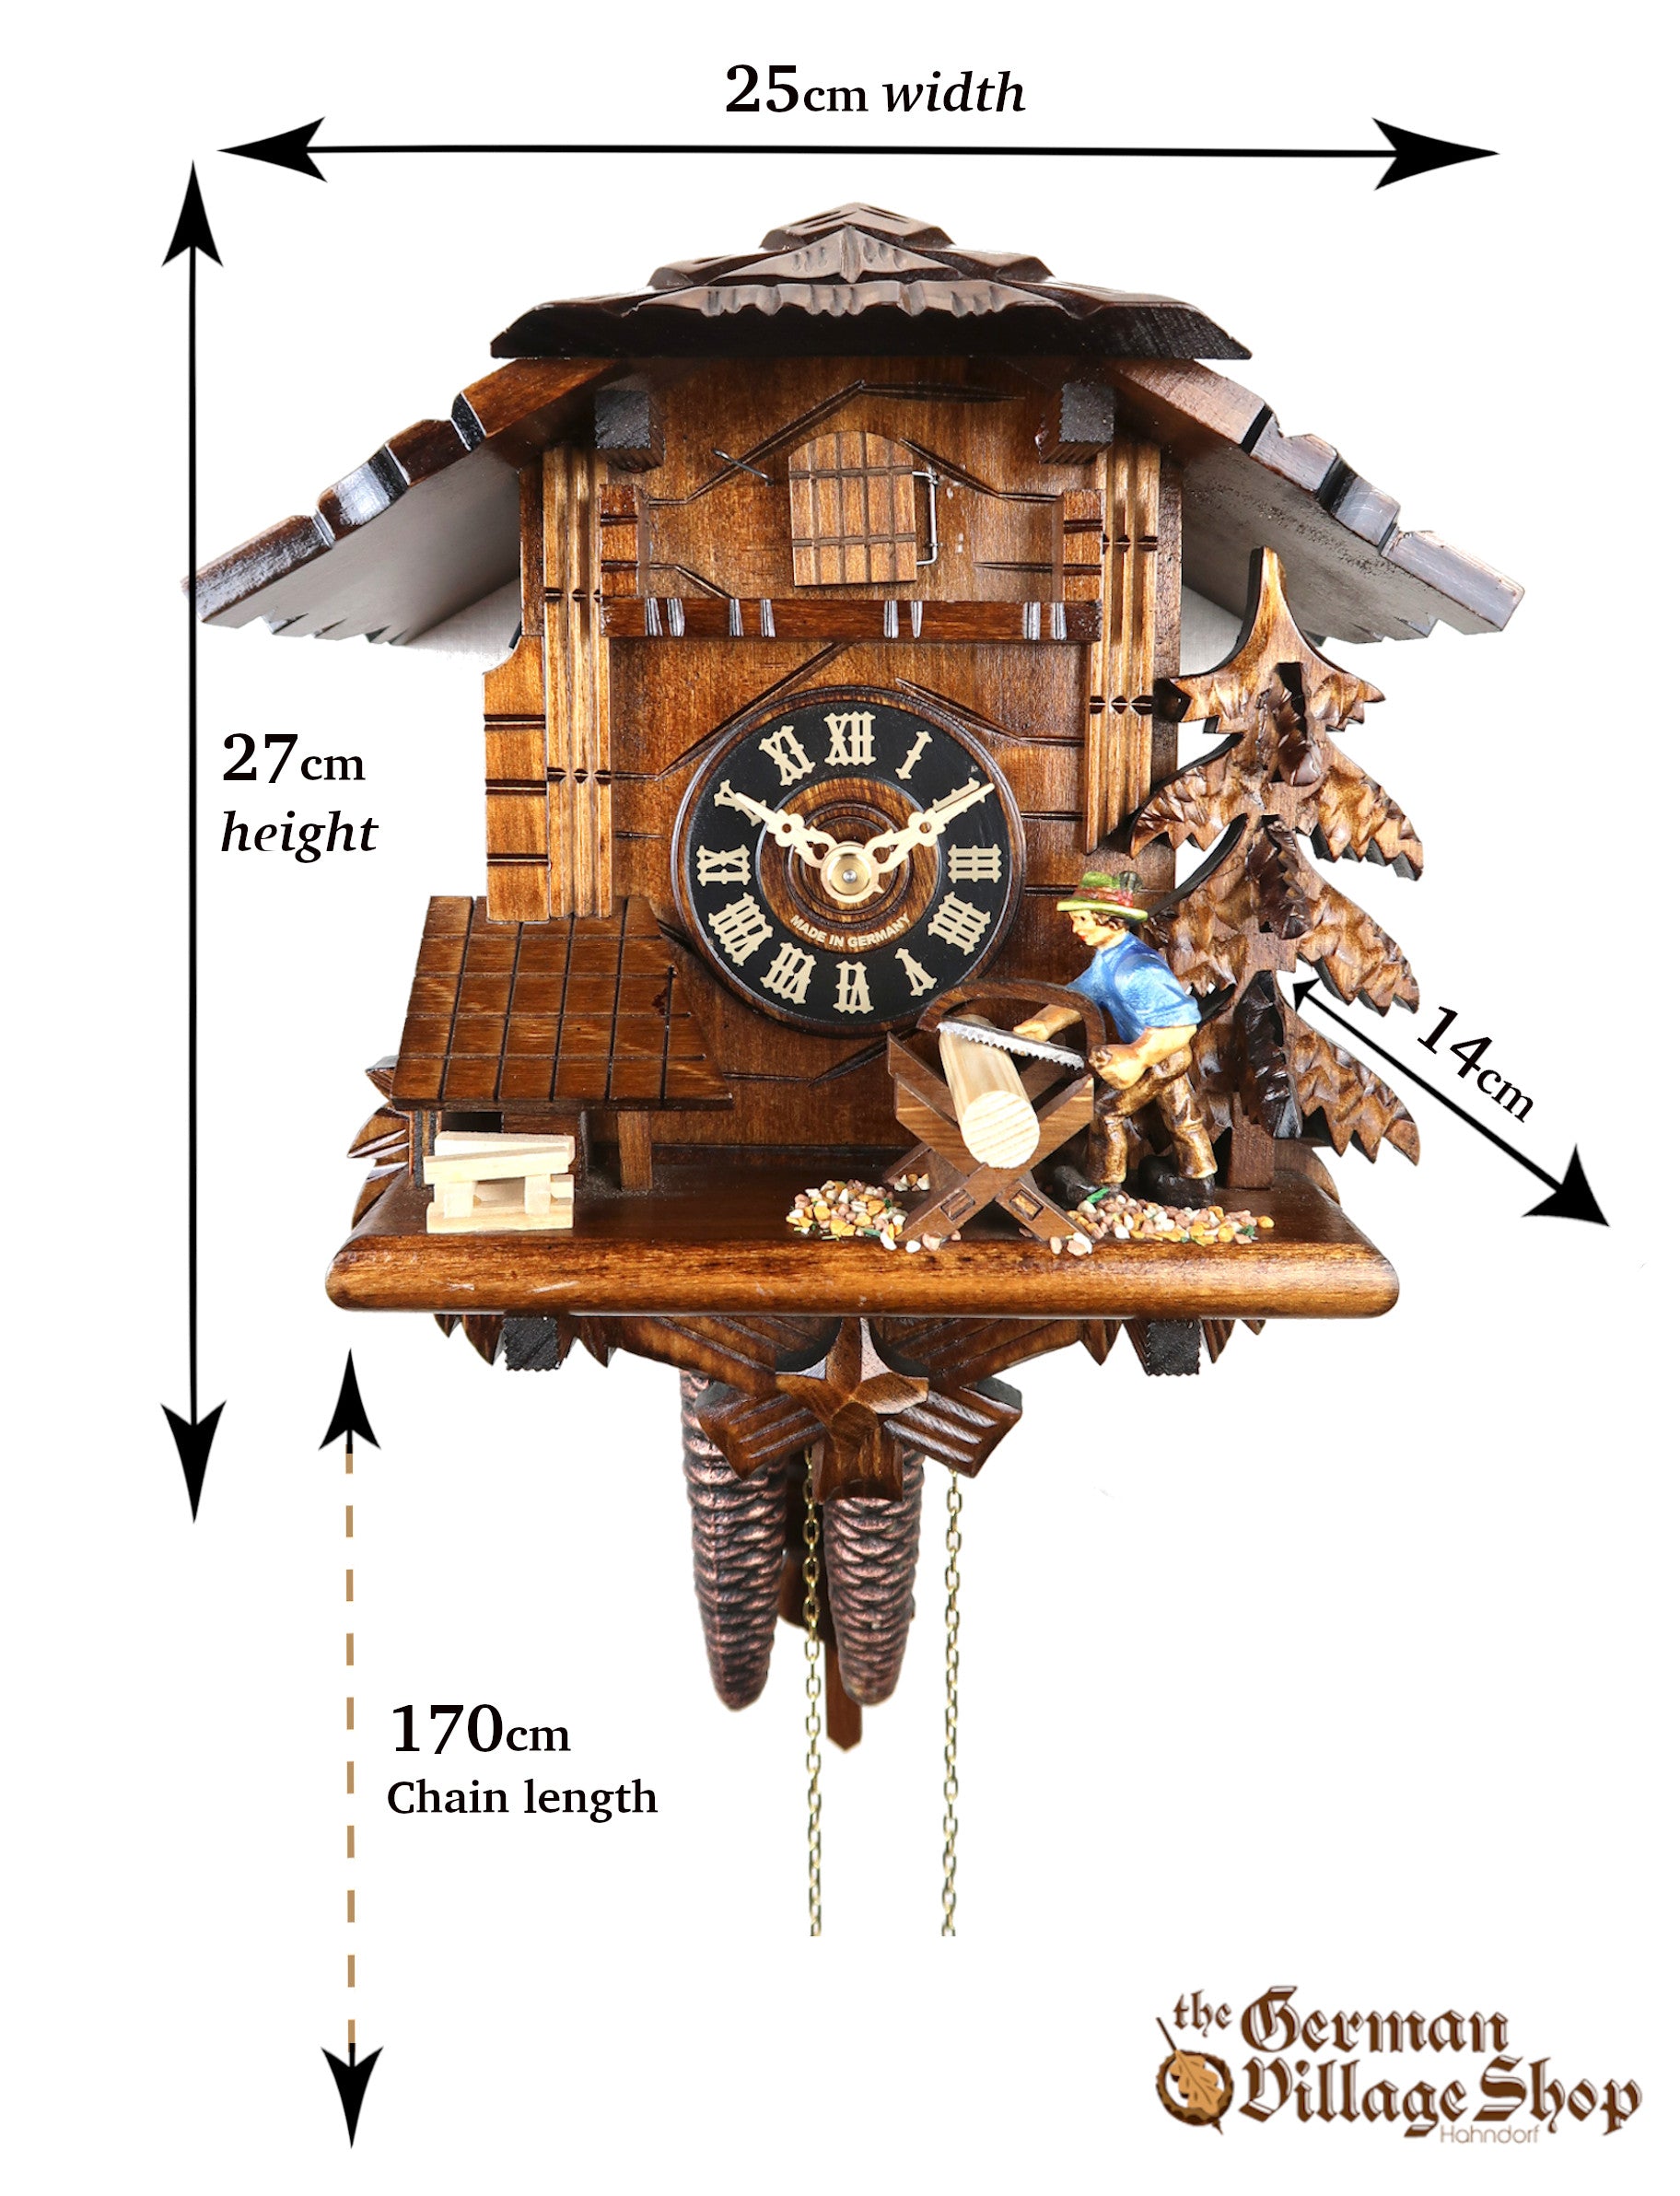 Size of German Cuckoo Clock imported and for sale in Australia